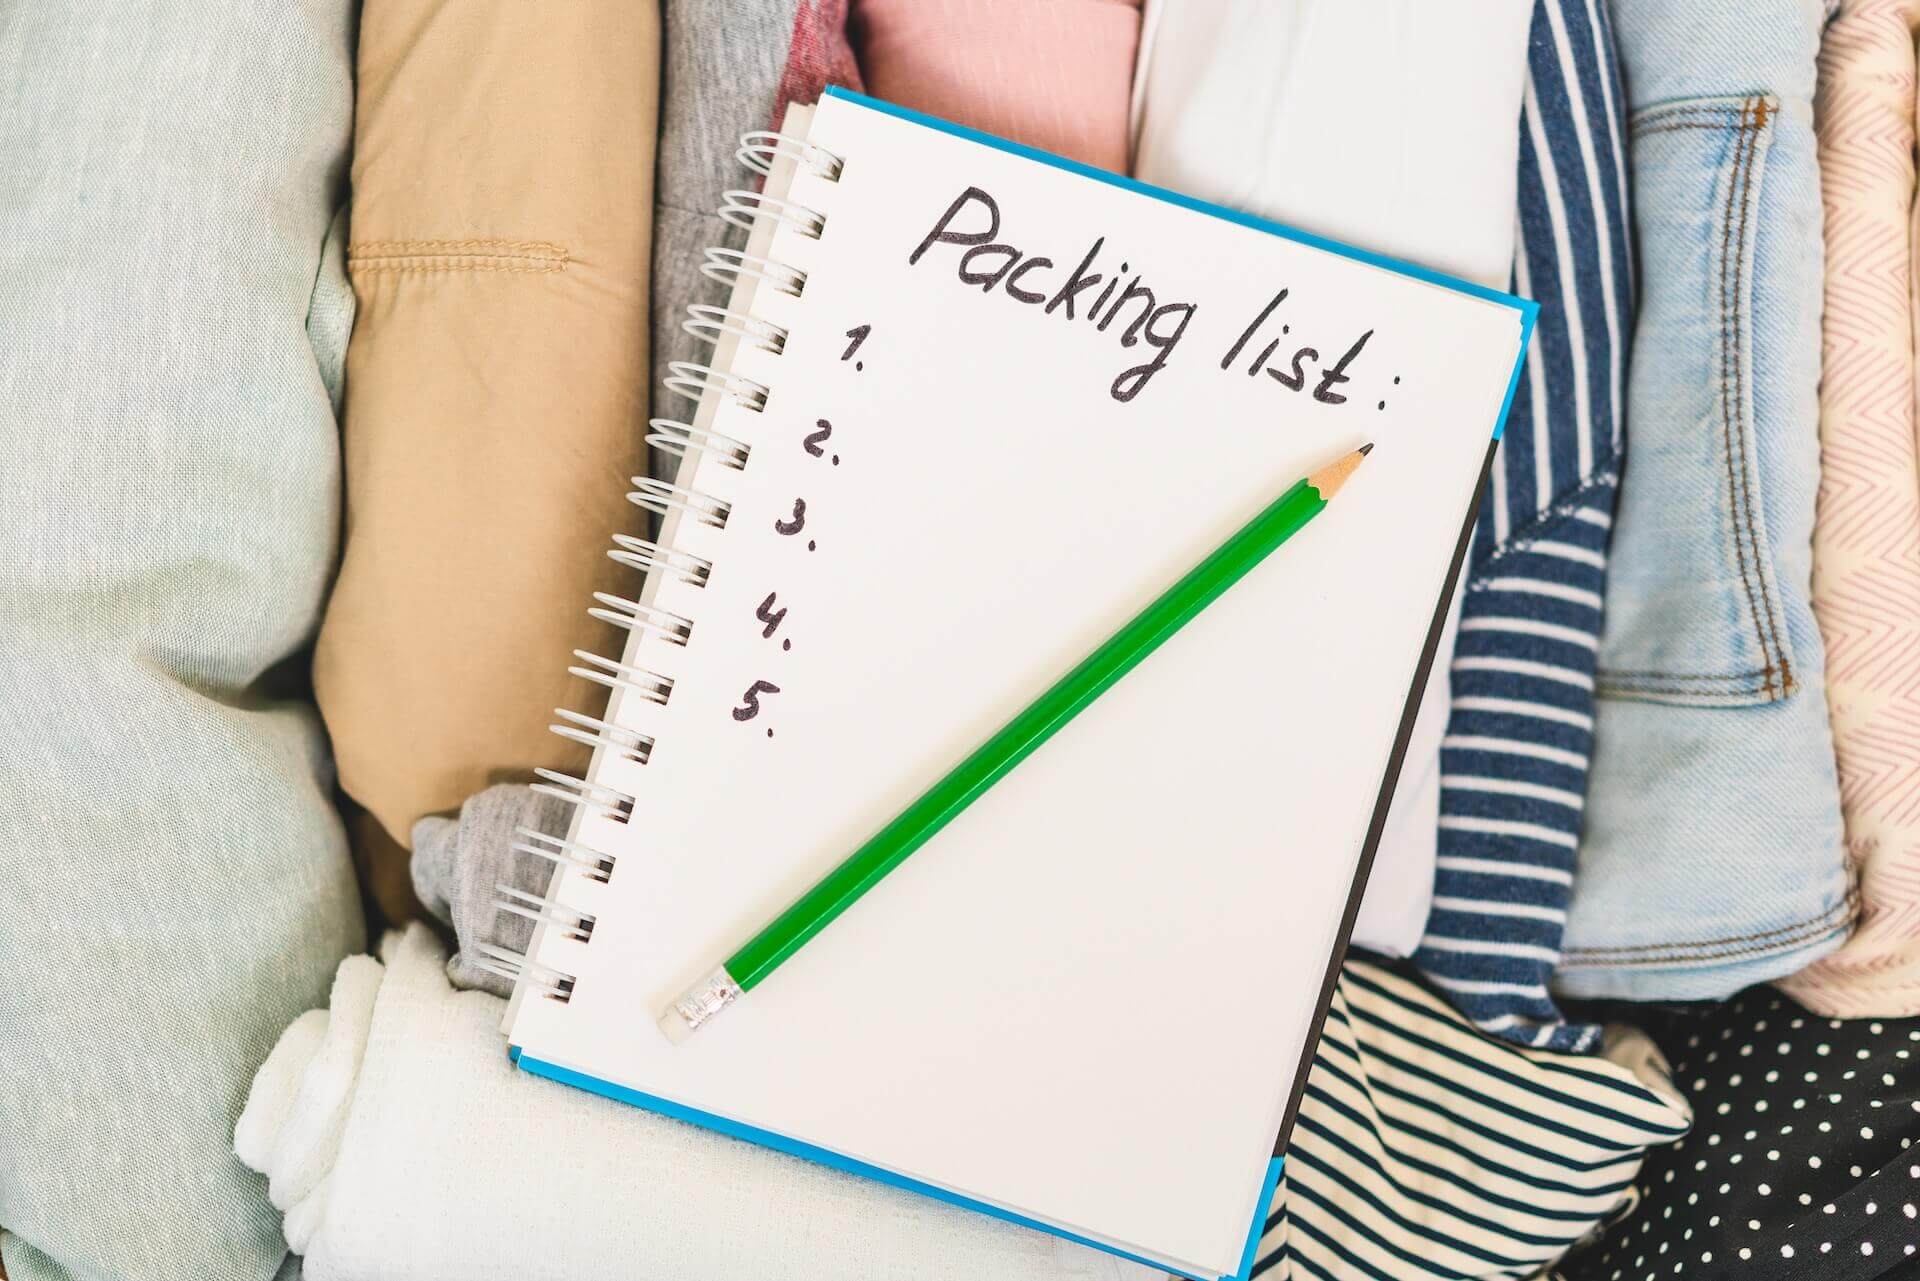 Packing list on the top of the rolled clothes